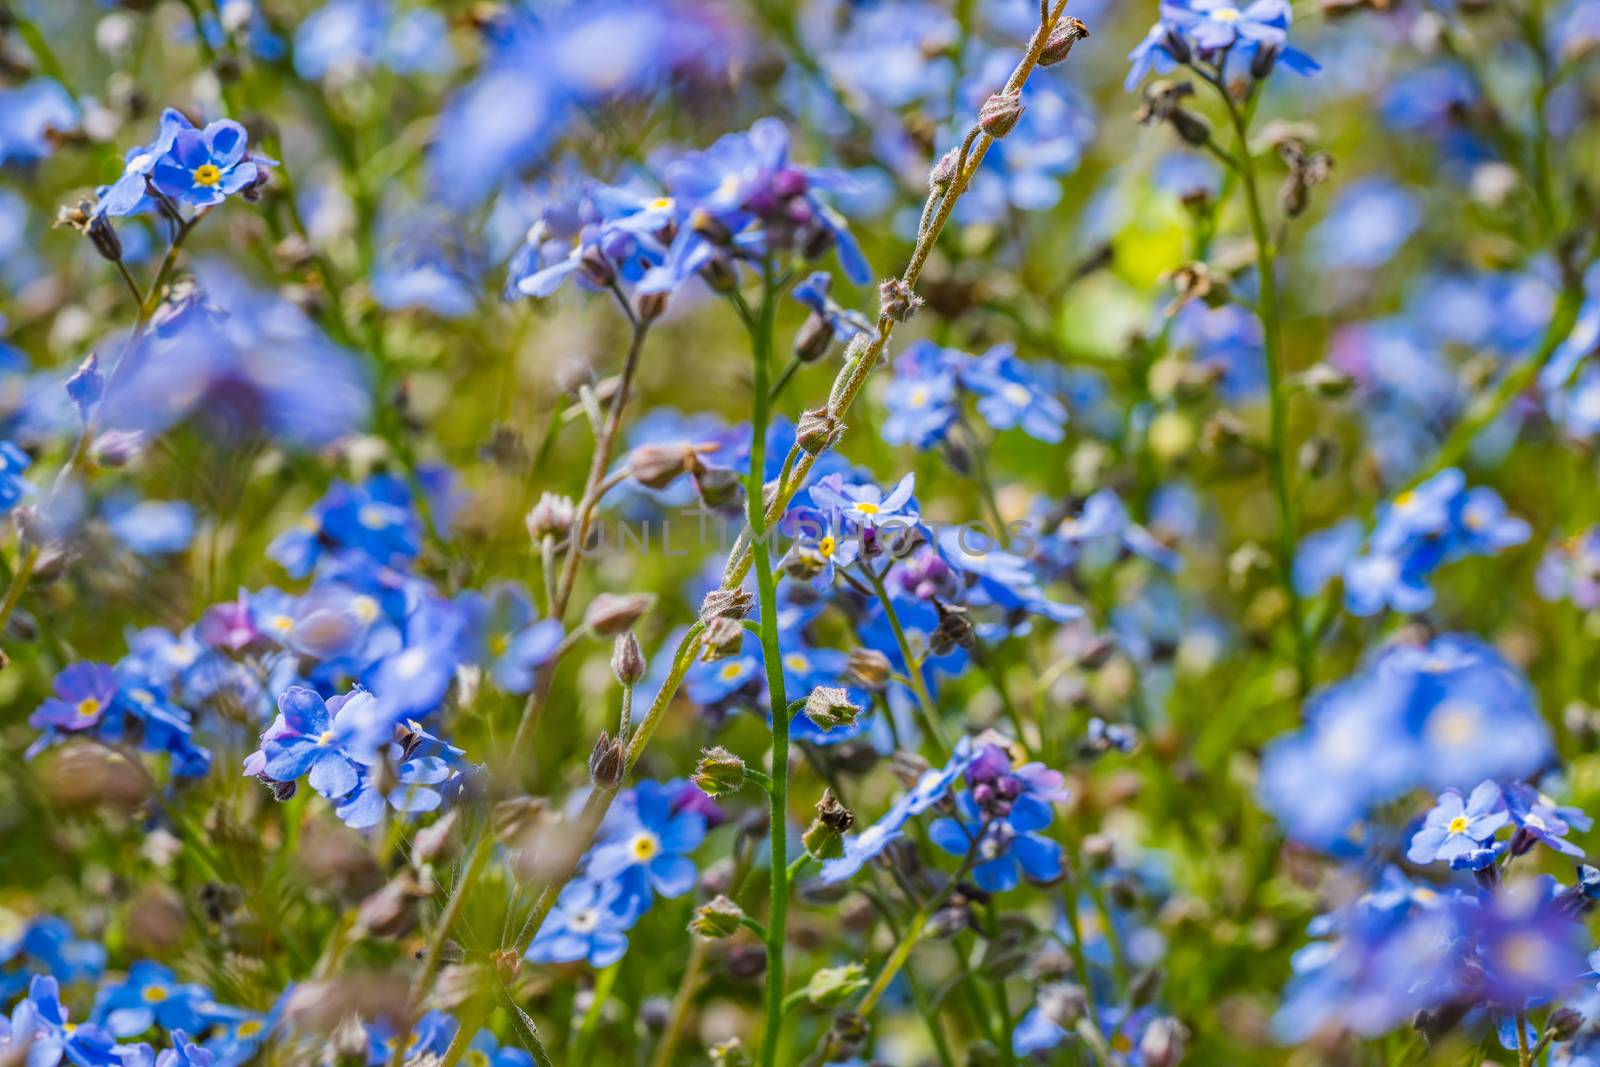 A close up of some small blue flowers